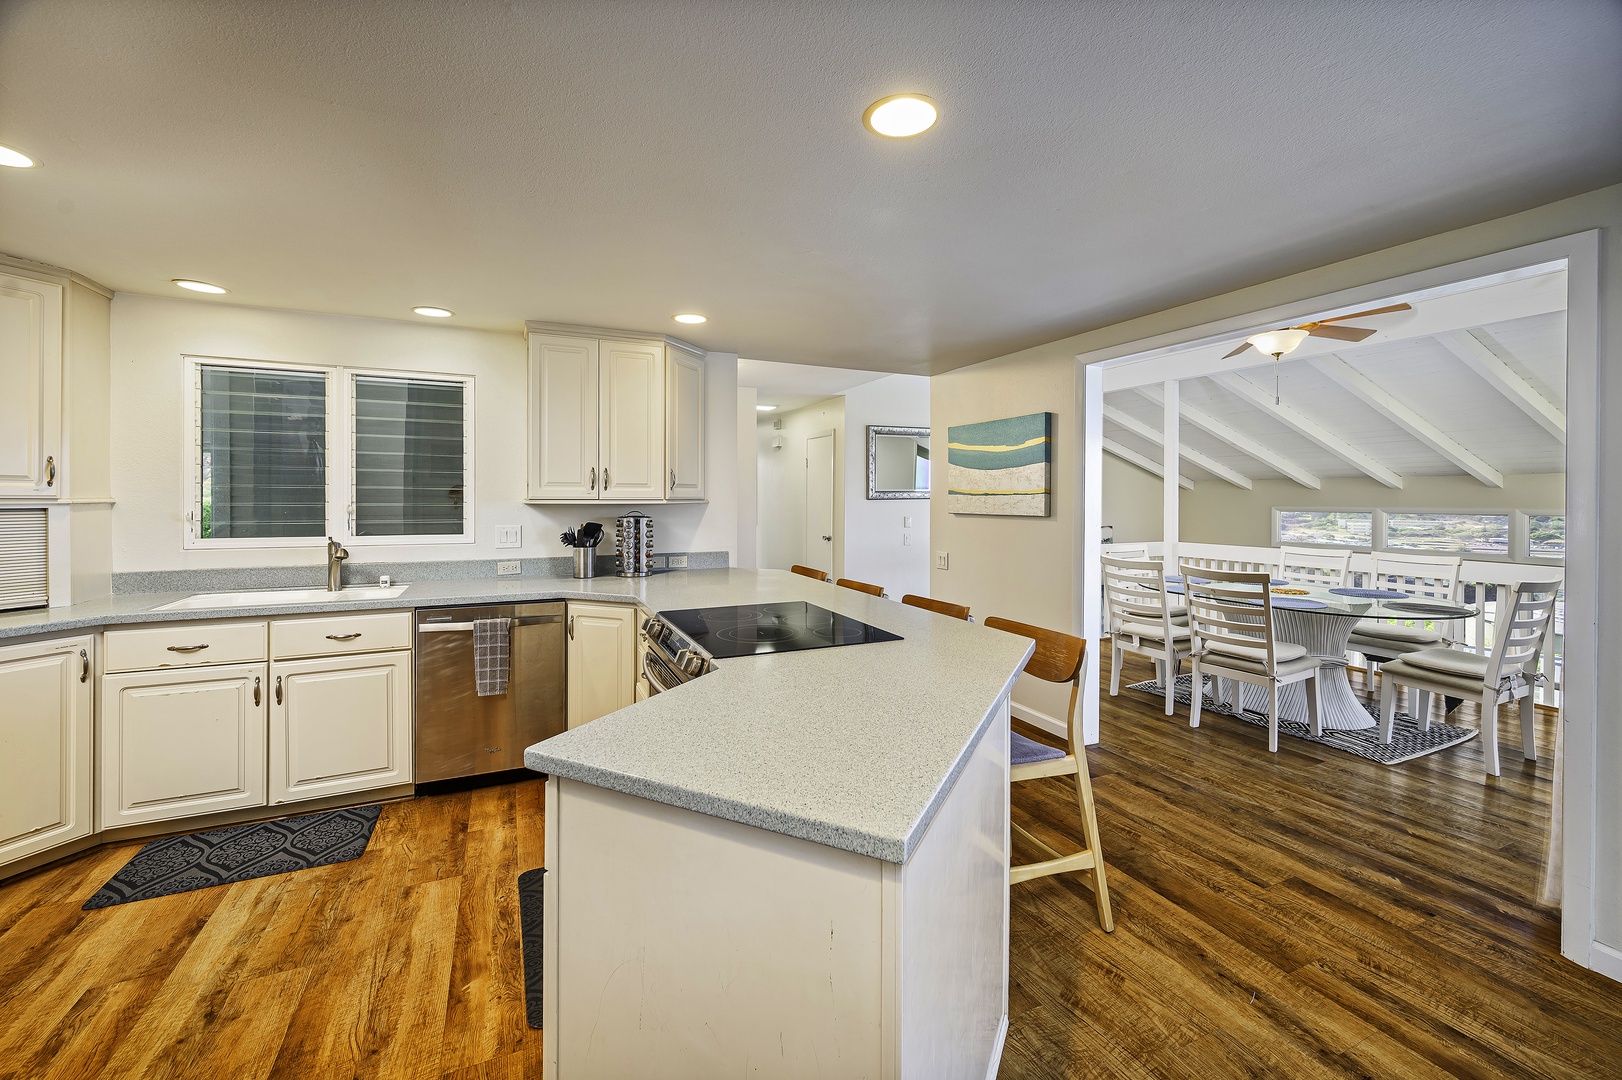 Honolulu Vacation Rentals, Hale Malia - The kitchen opens up to the indoor dining area on the upper level